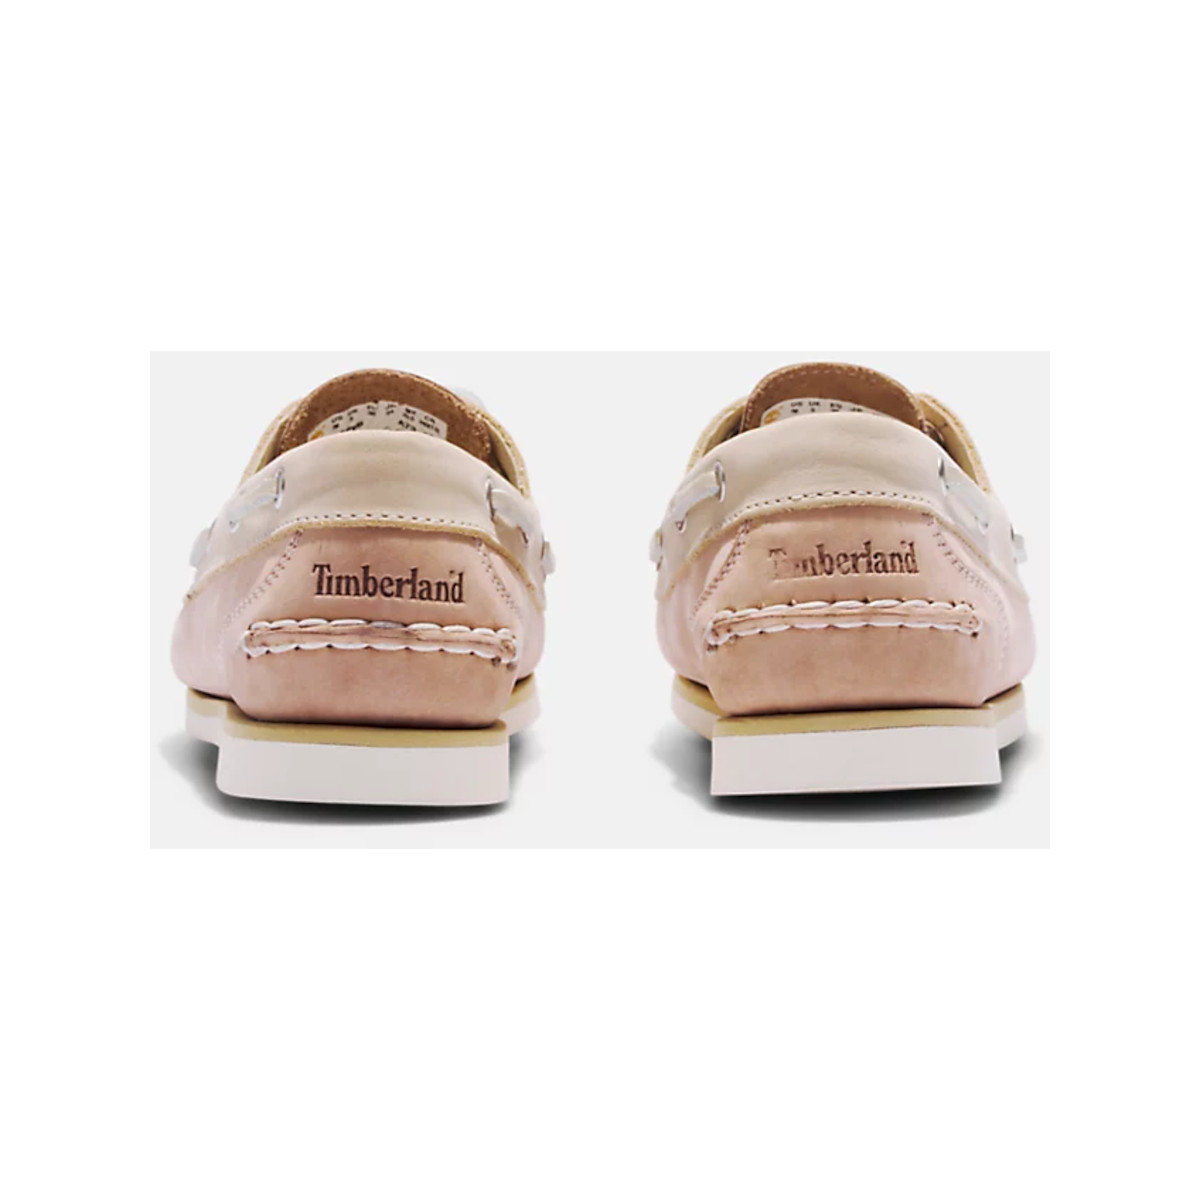 Timberland Classic Boat chaussure bateau femme - beige clair, pointure 39,5